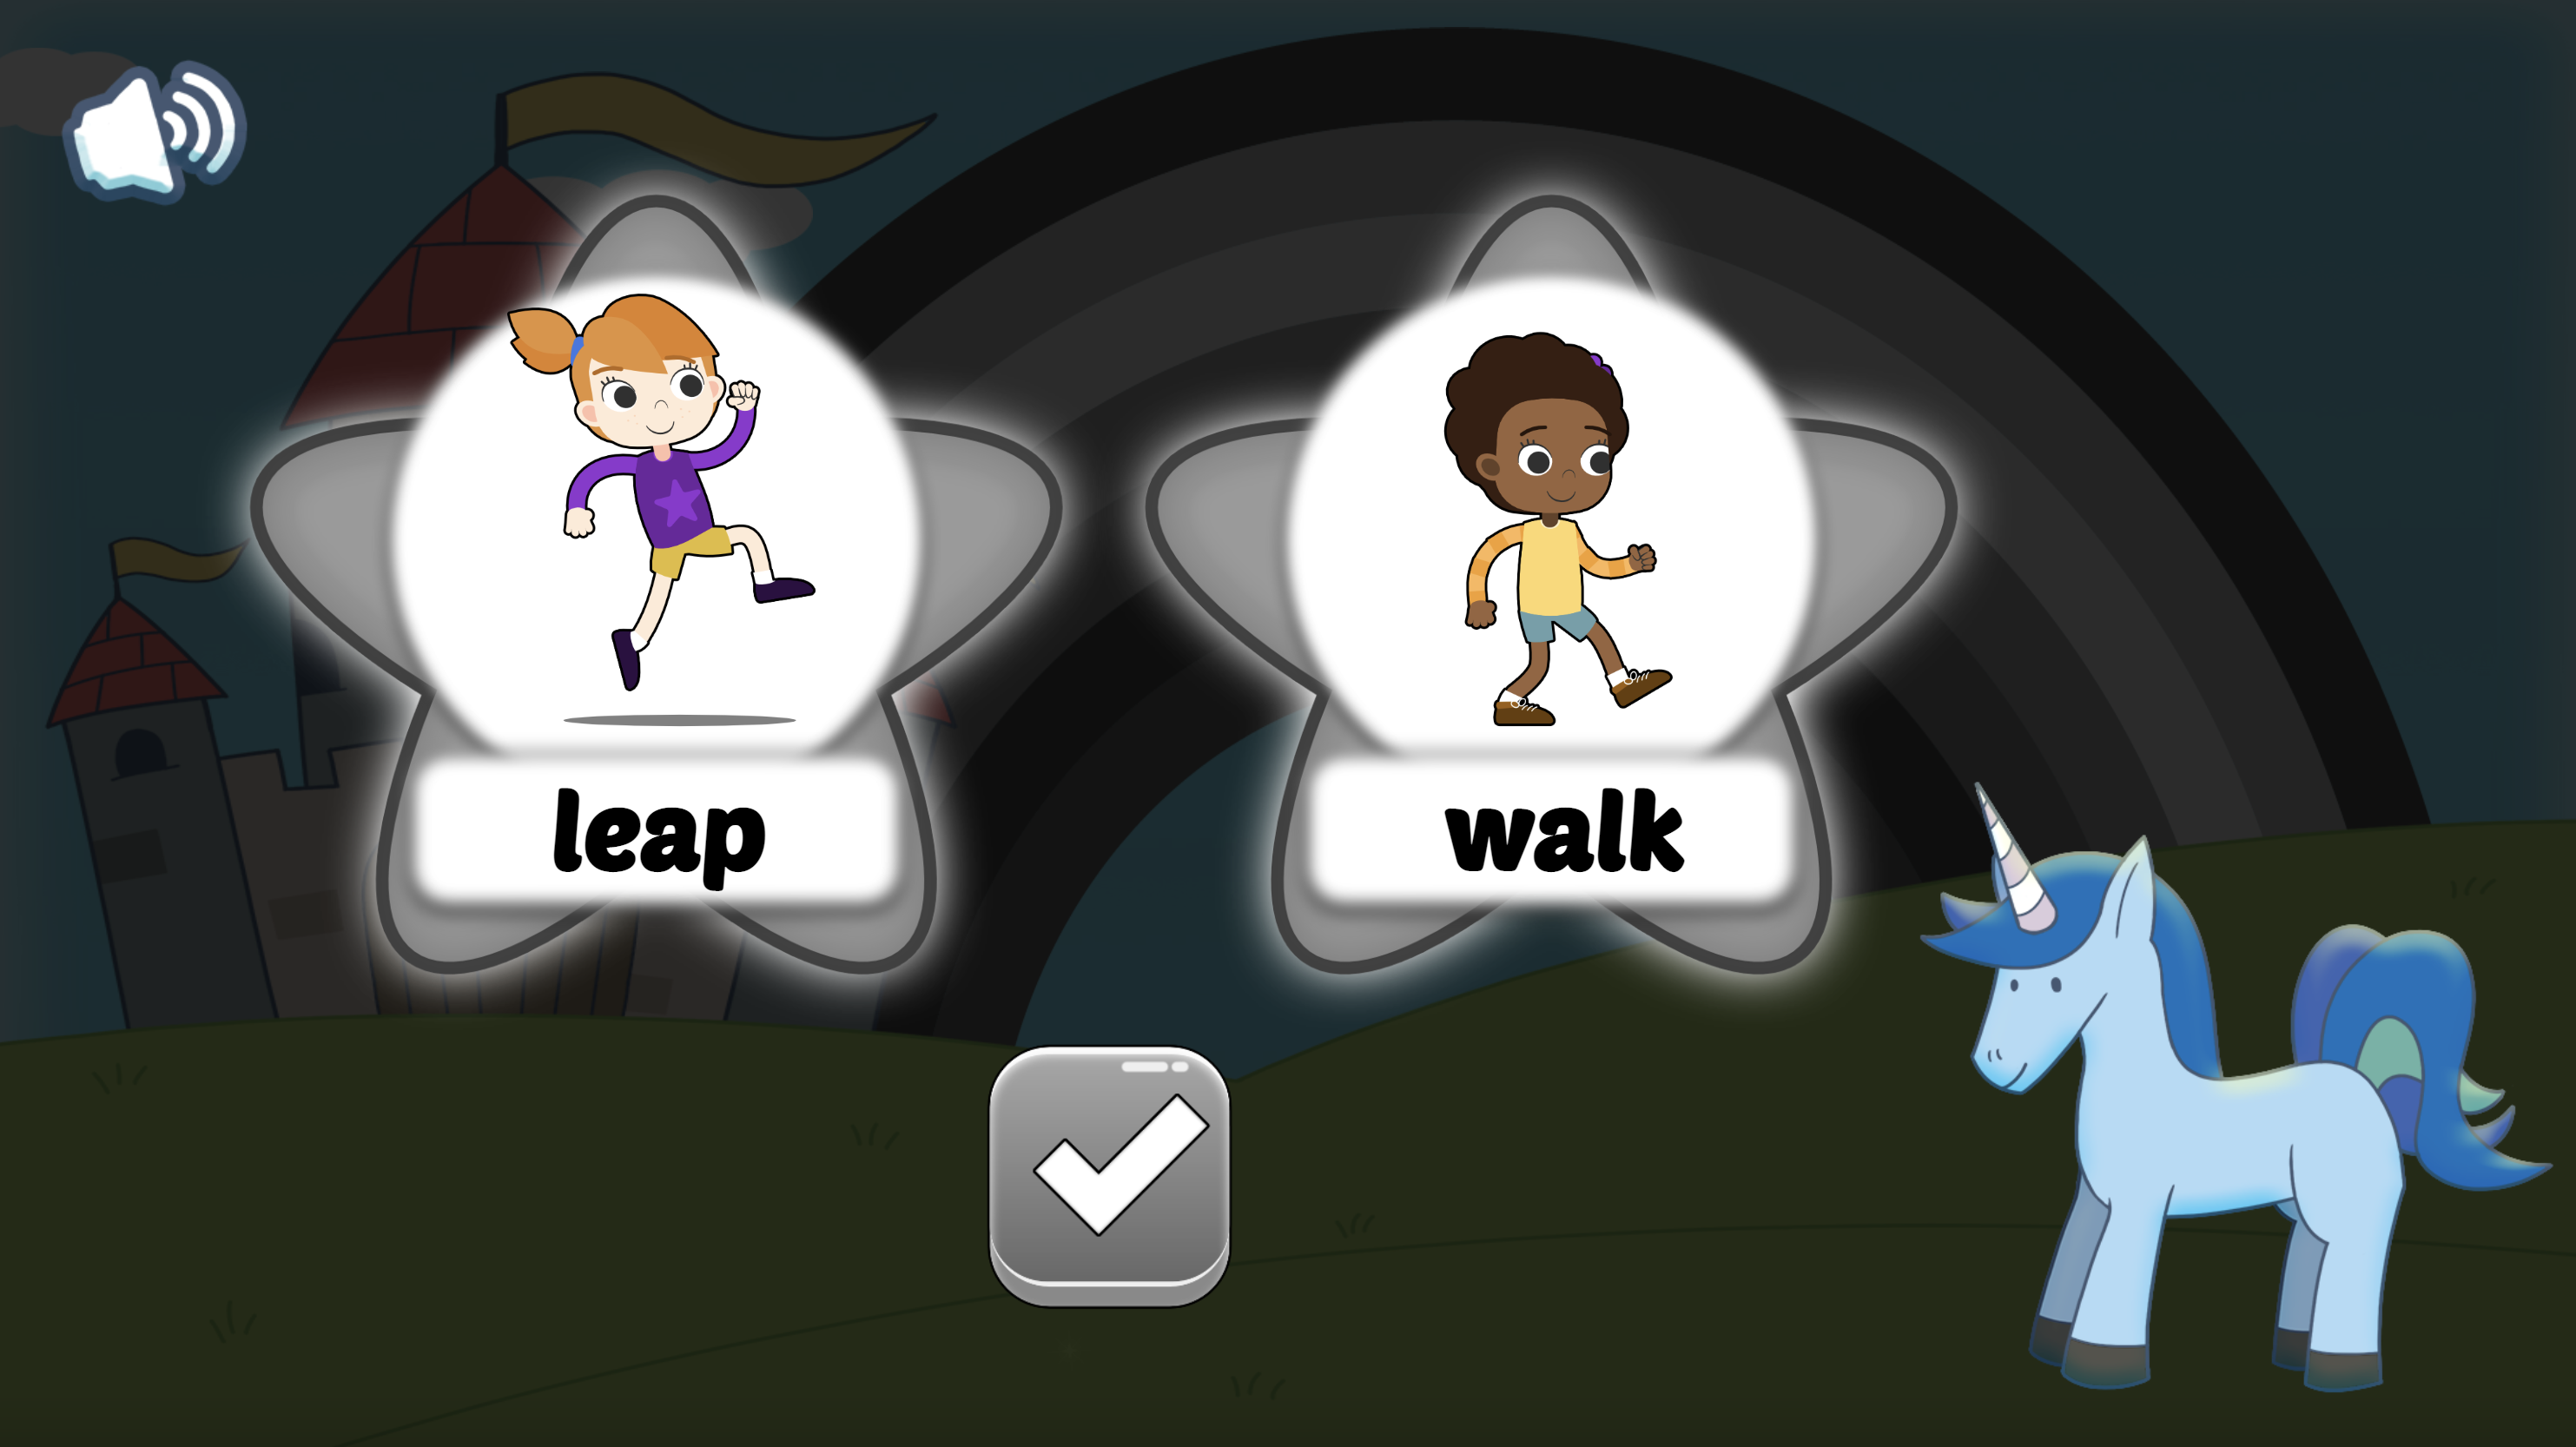 Choose which word is stronger than hop, leap or walk